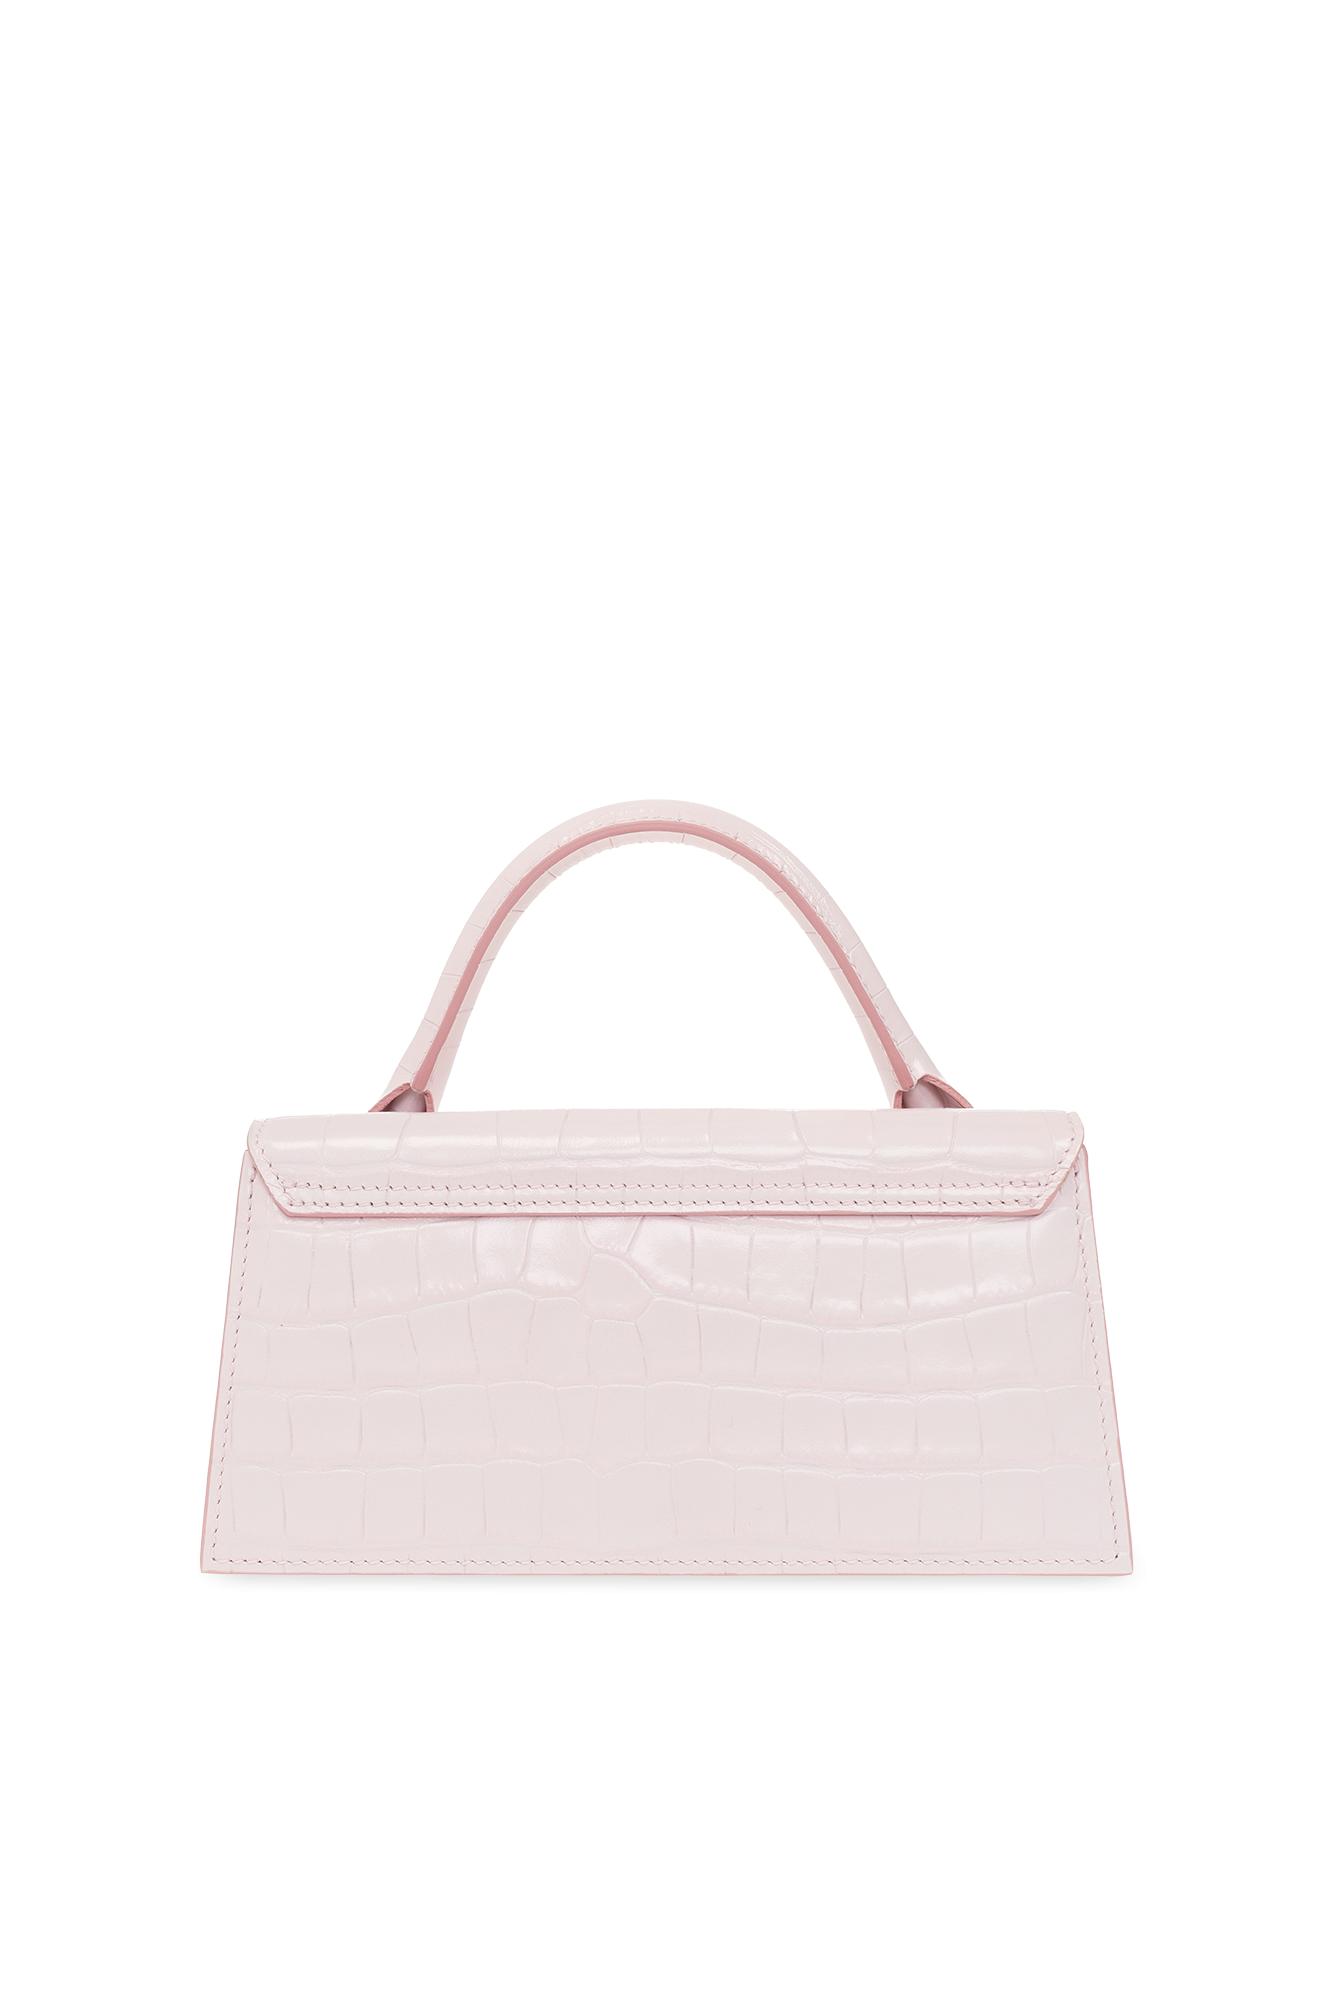 Jacquemus Le Chiquito Long Tote Bag In Pink